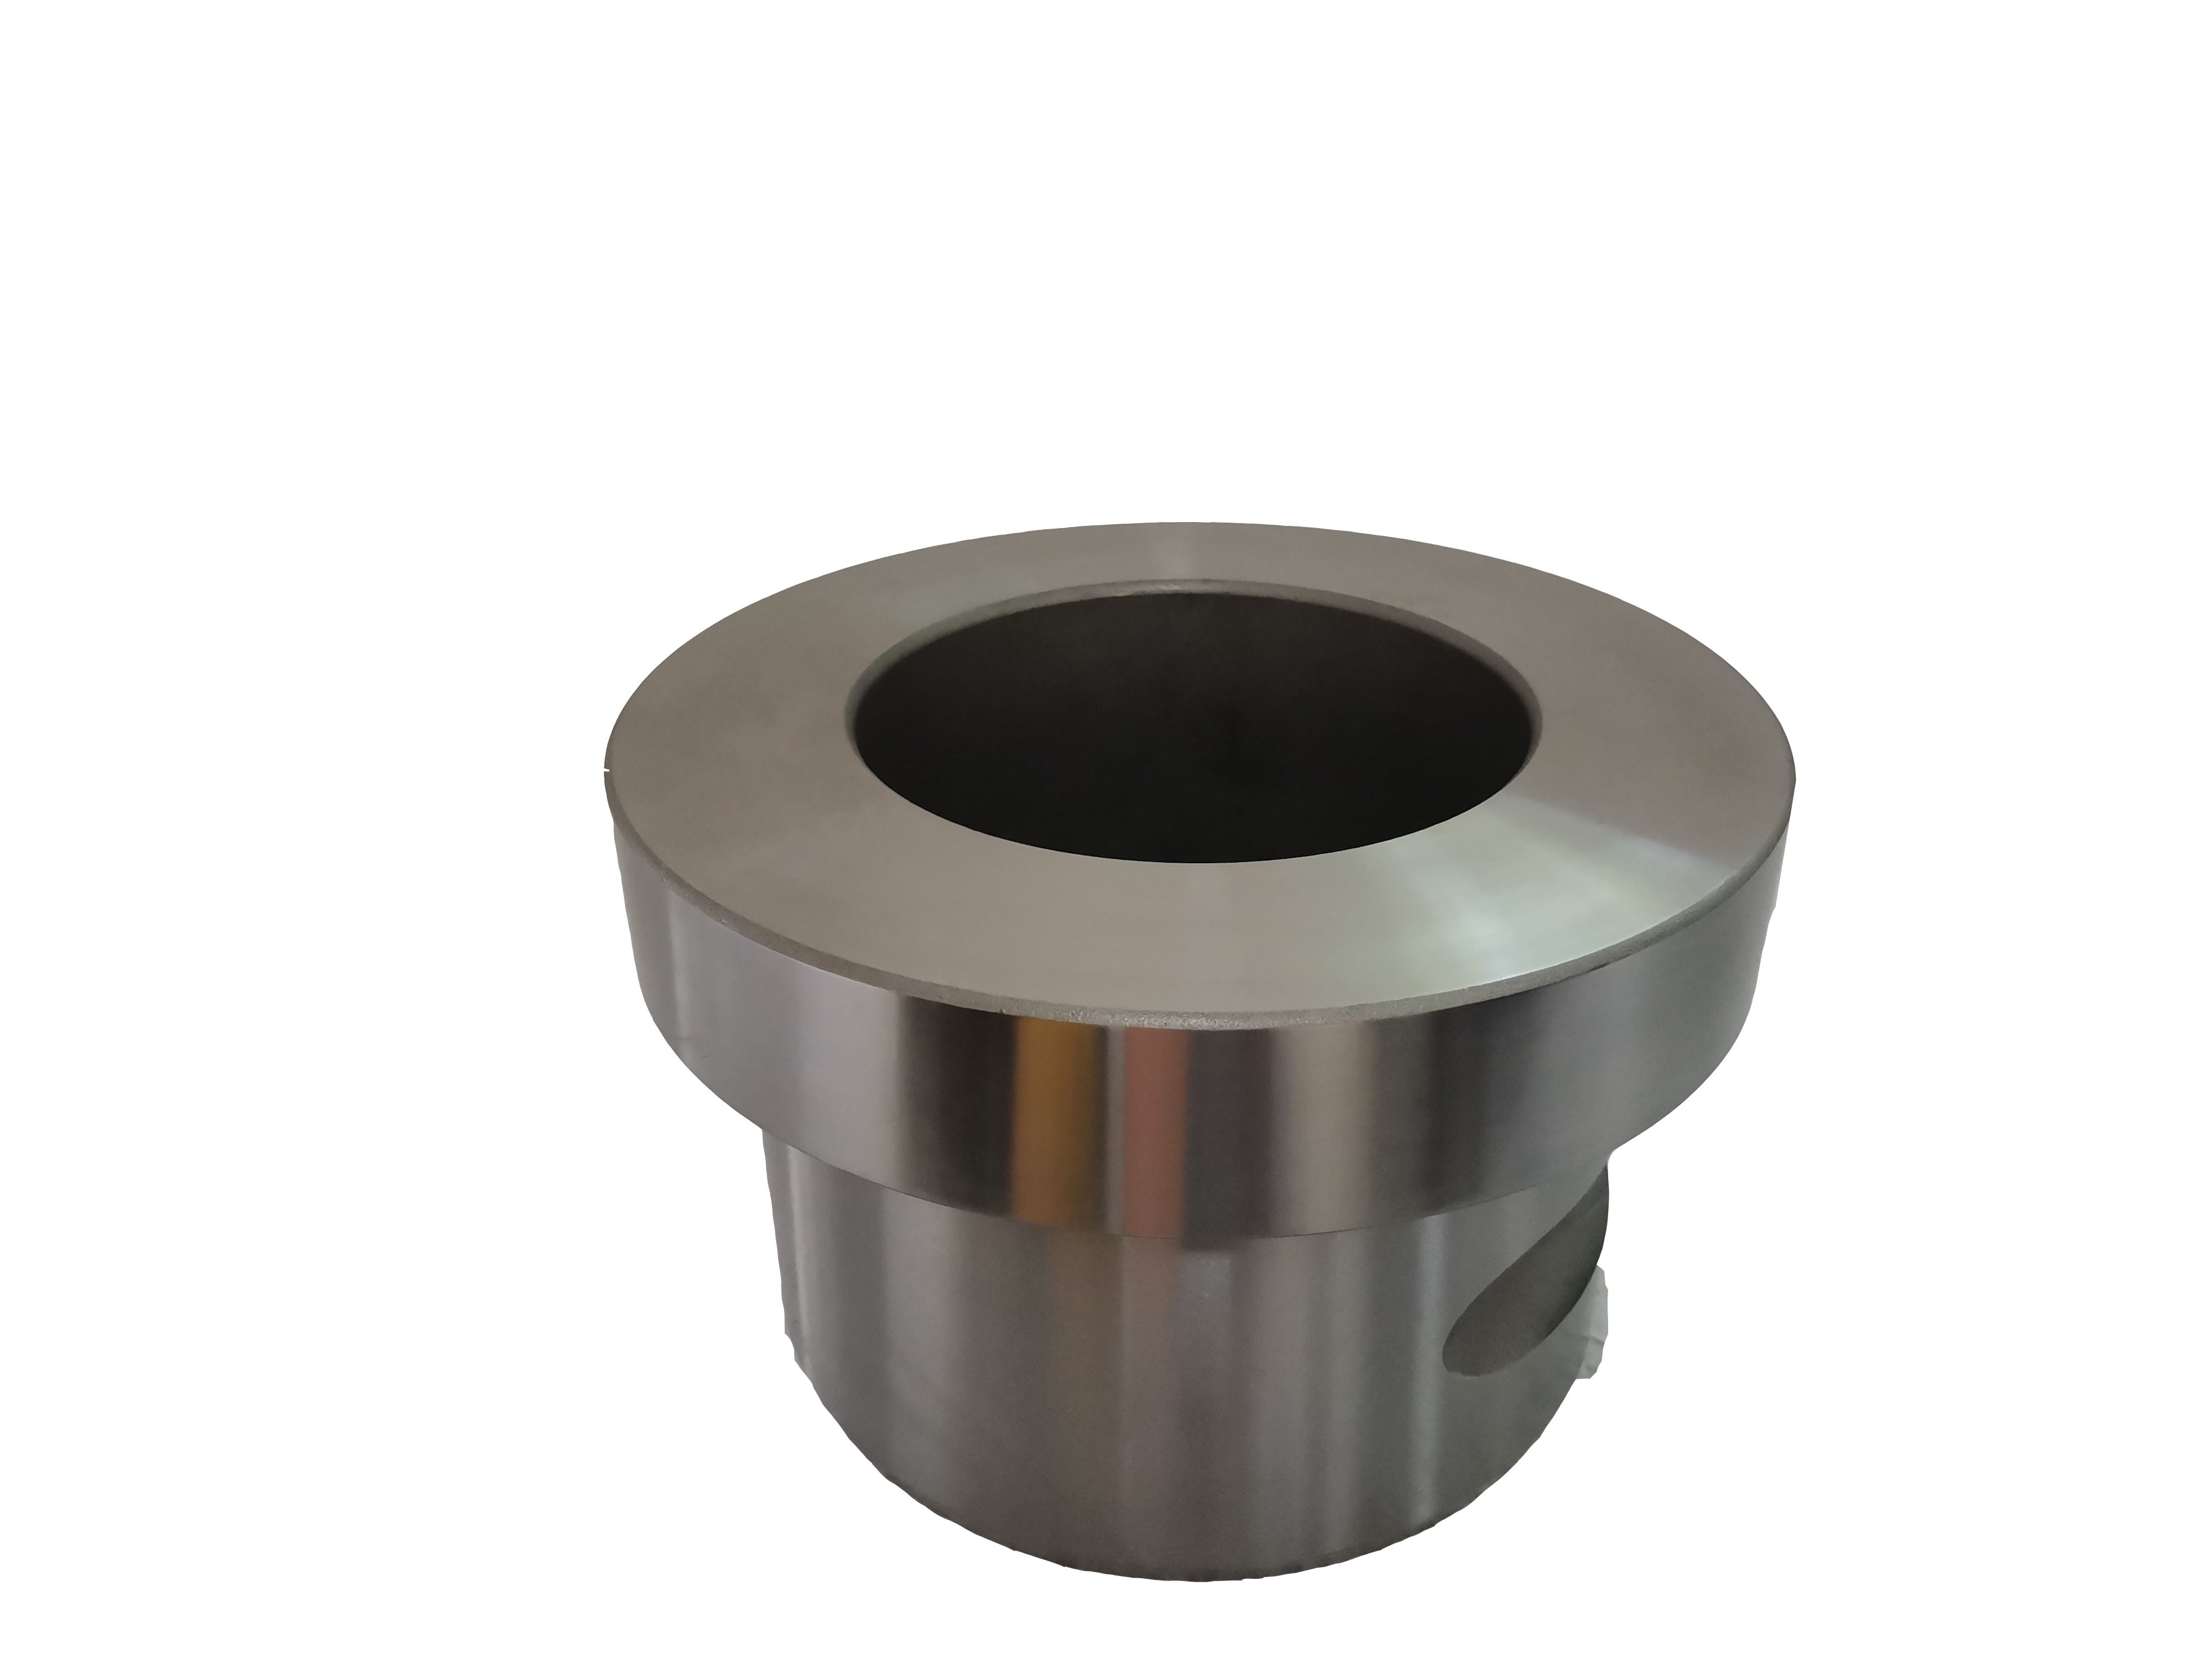 Excavator Hydraulic Breaker Bushing Front Covers Thrust Ring Bush for Hb20g